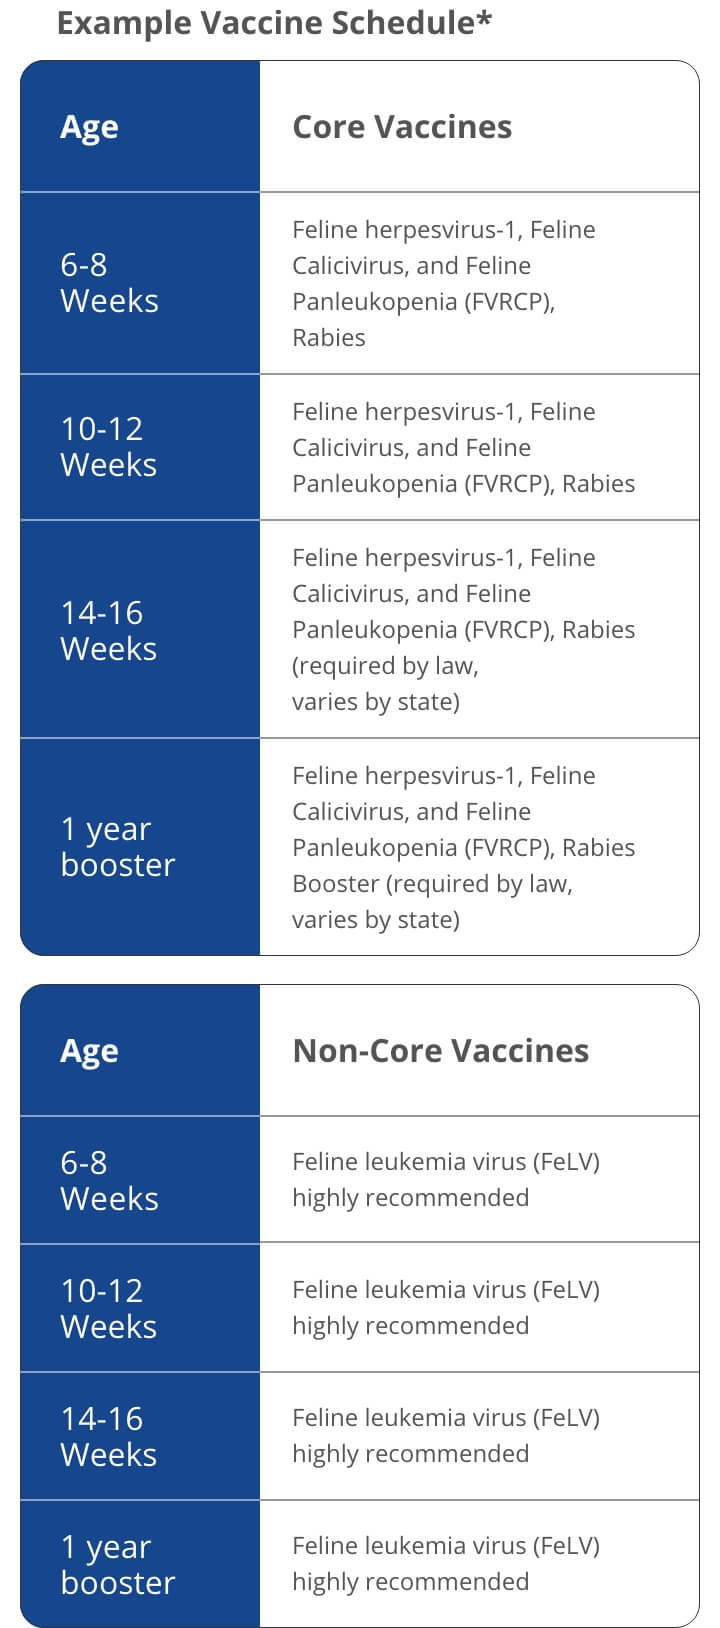 A chart showing an example of a vaccination schedule for cats. The chart shows that at 6-8 weeks of age, kittens require Feline Herpesvirus-1, Feline Calicivirus, and Feline Panleukopenia (FVRCP);Feline Leukemia Virus (FeLV), and Chlamydia felis. At 10-12 Weeks, they need FVRCP, FeLV, and Chlamydia felis. At 14-16 Weeks, they need FVRCP, Rabies†, and Chlamydia felis. At one year, they need FVRCP, Rabies†, Chlamydia felis, and FeLV  | Healthy Habits For New Pets